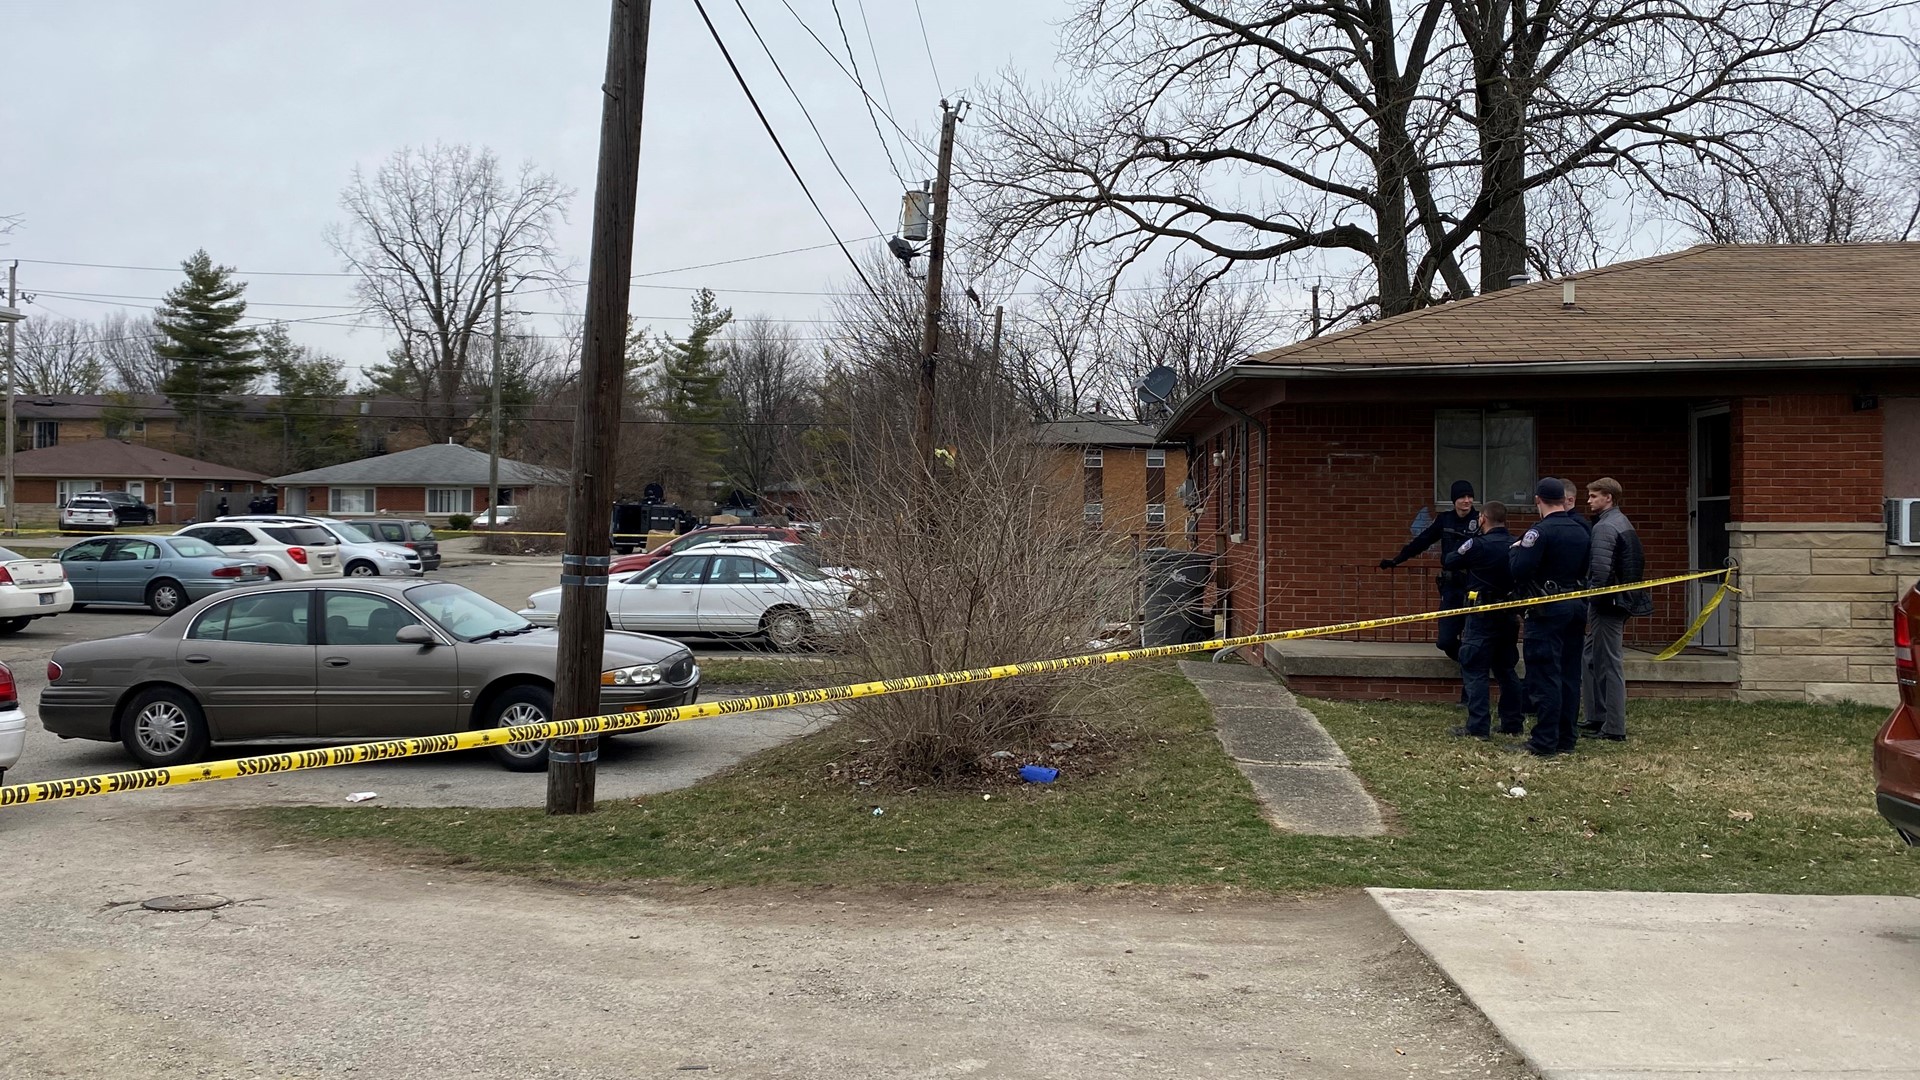 Police say 25-year-old Malik Halfacre has been arrested in connection with the quadruple homicide after an hours-long SWAT situation Sunday.